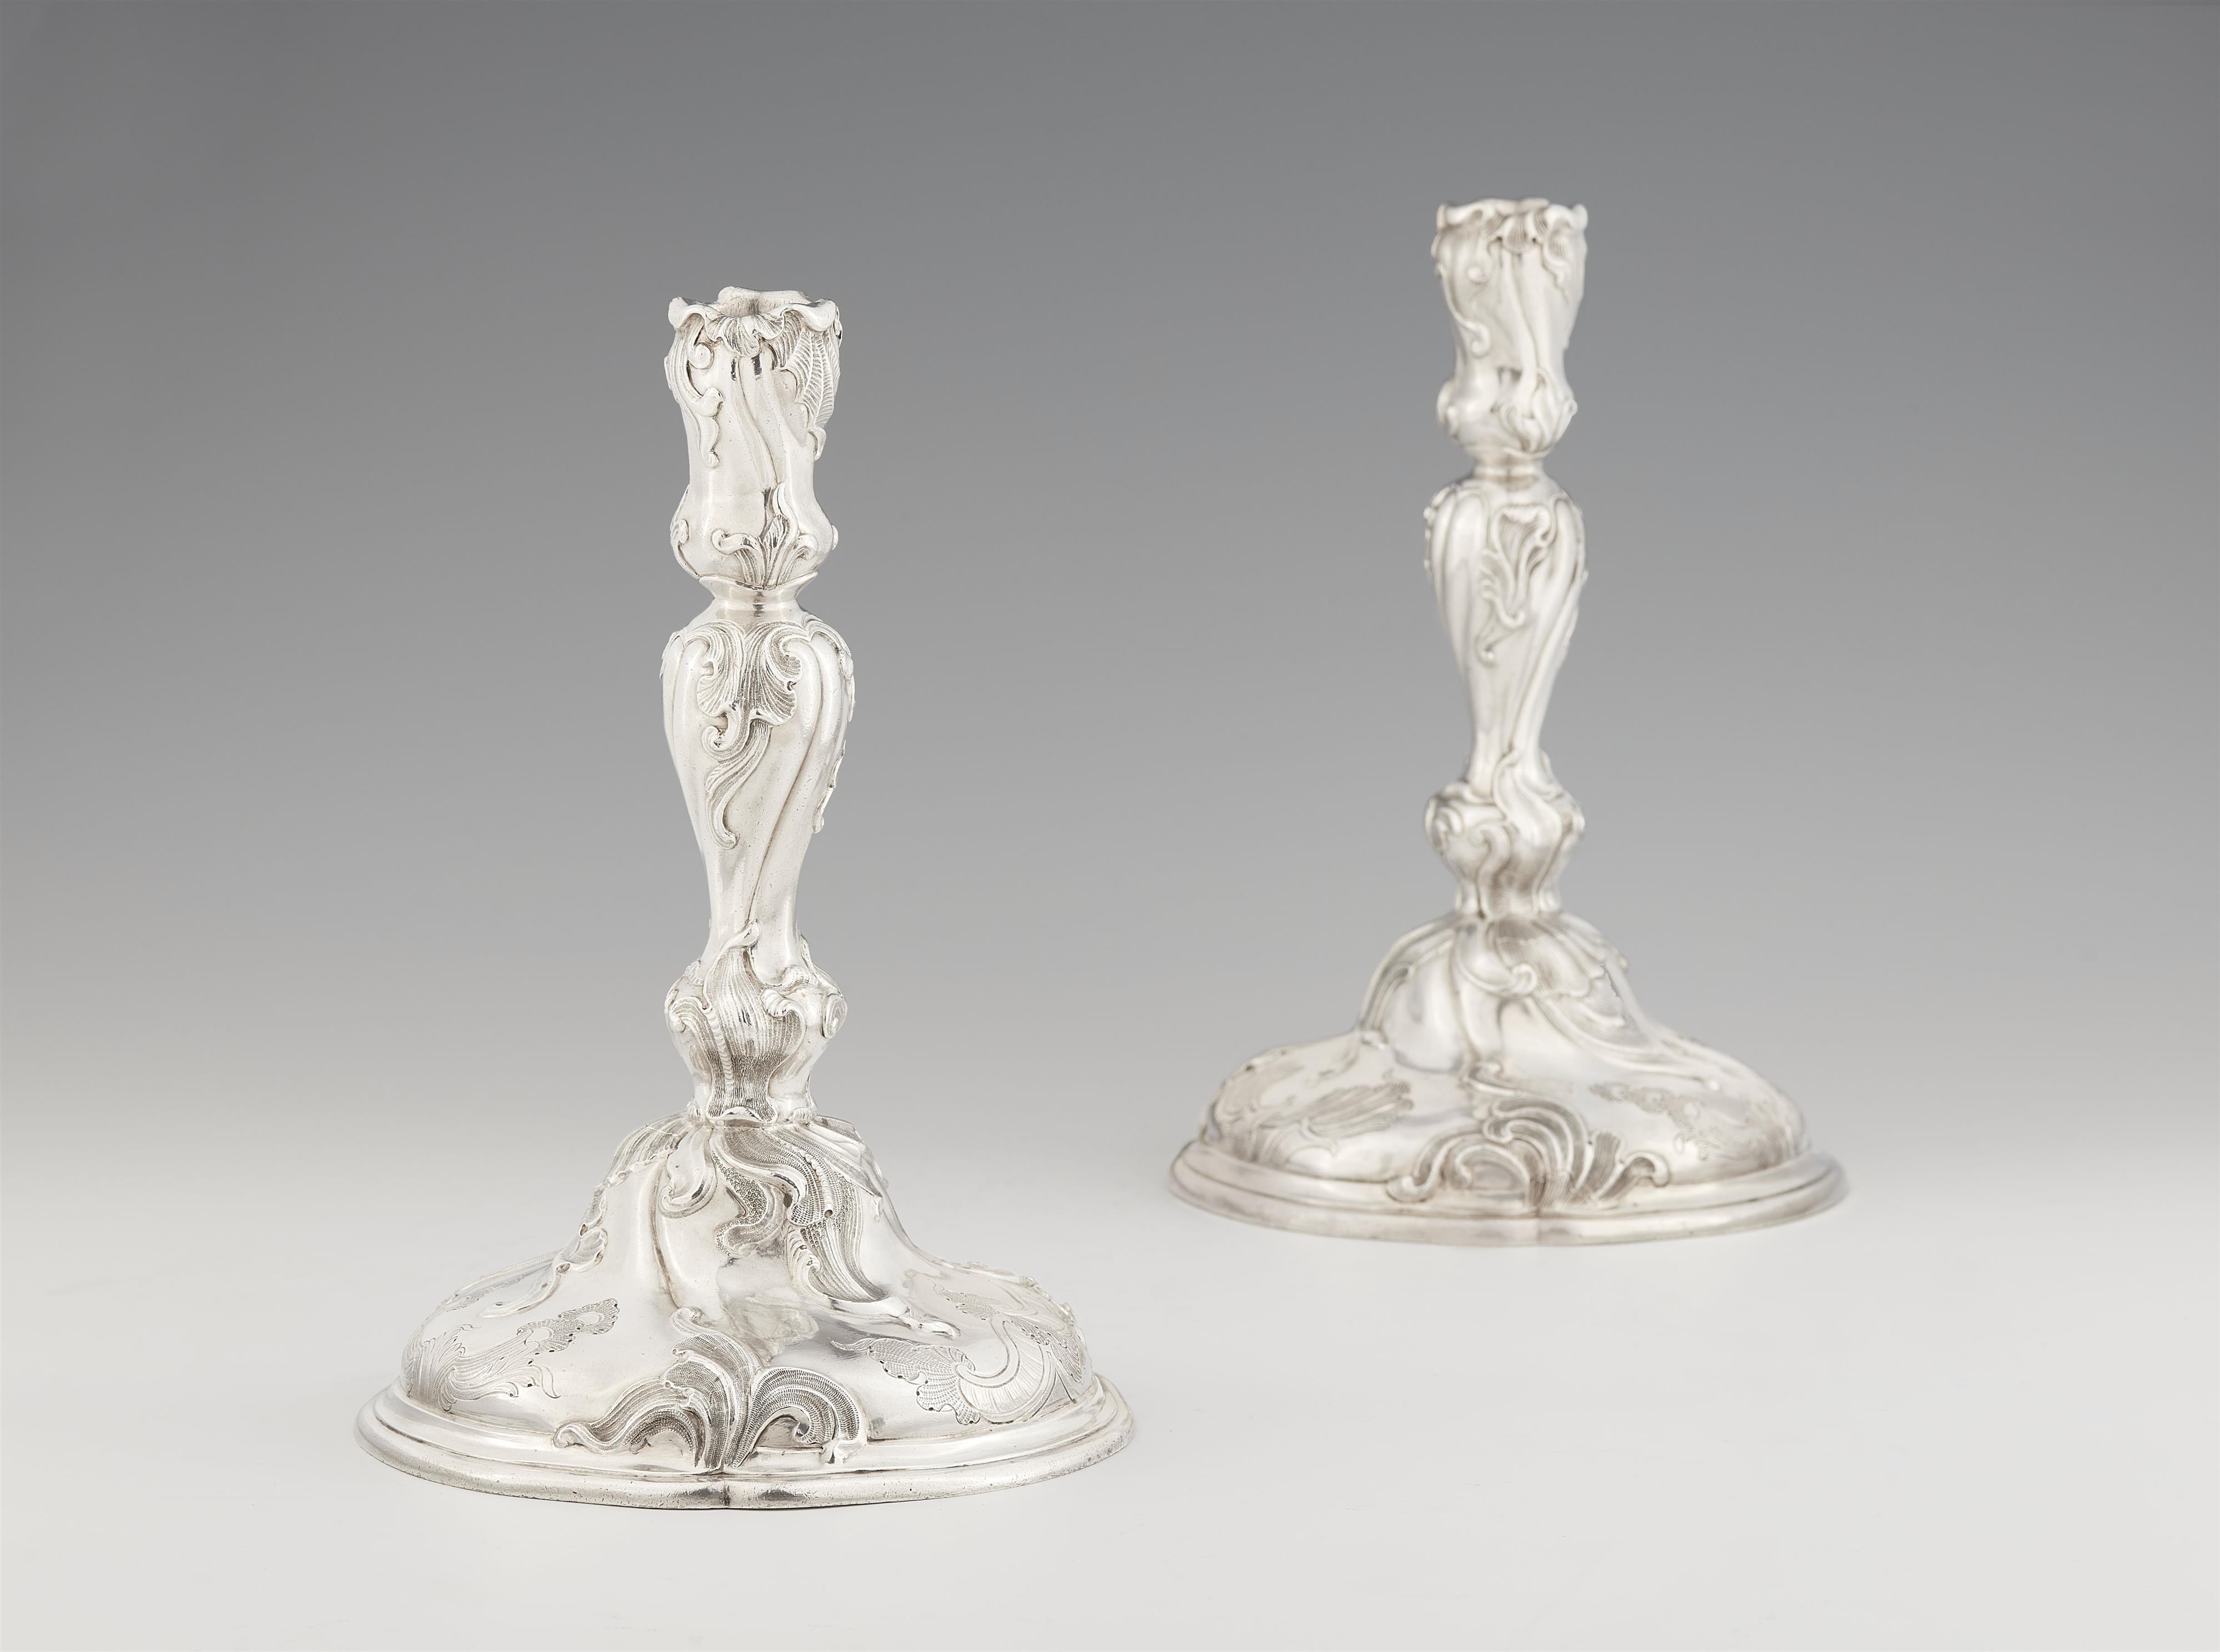 From the Dresden court silver:
A pair of candlesticks made for Prince Elector August II of Saxony - image-2